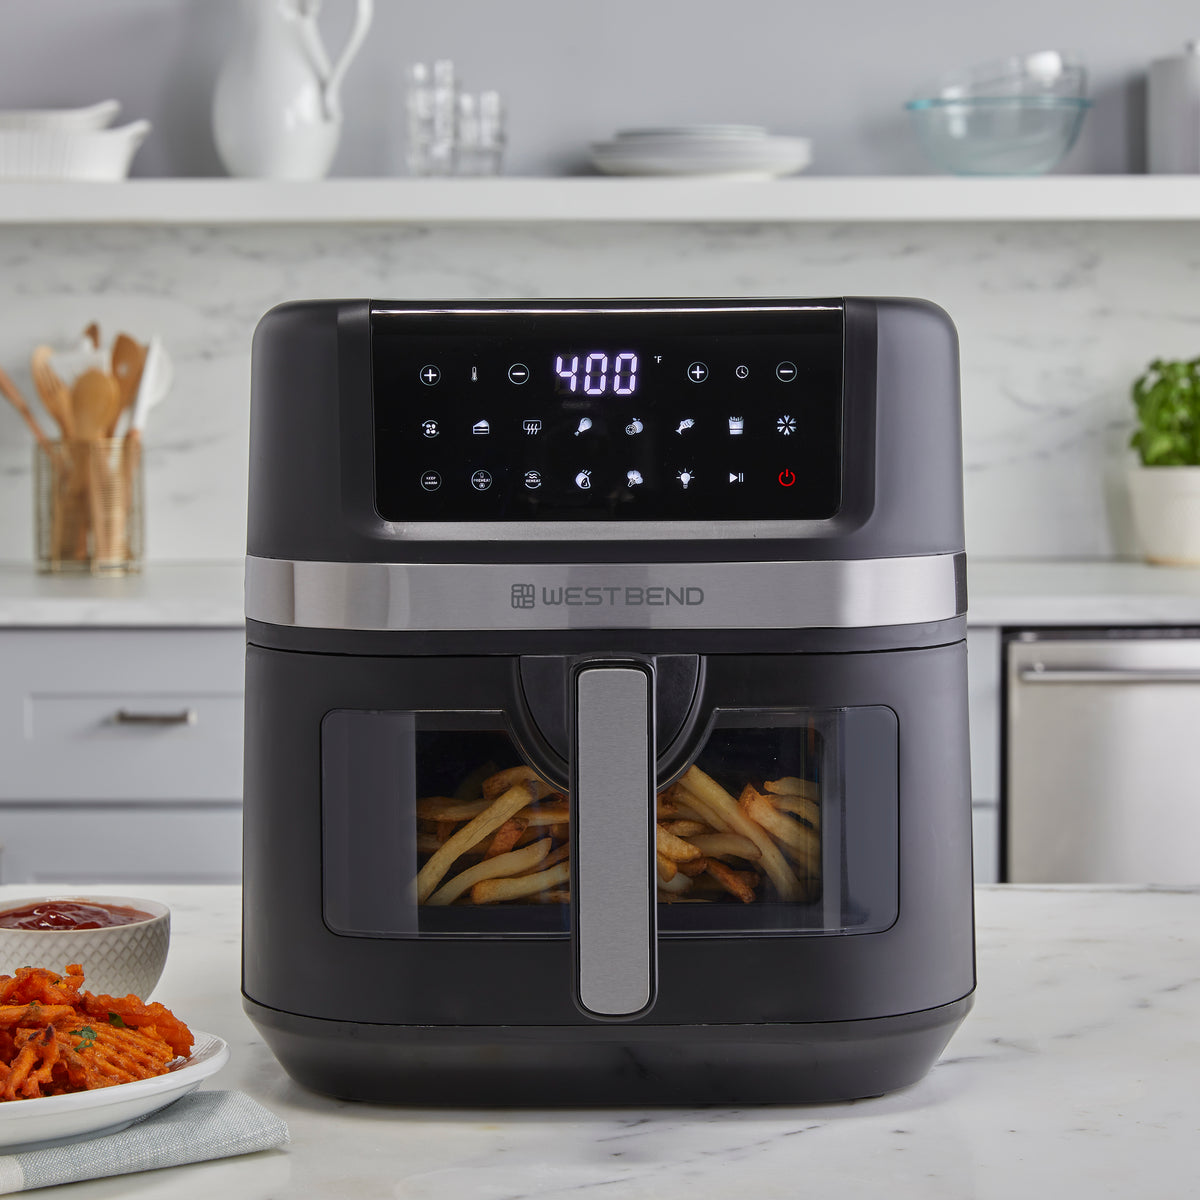 SUR LA TABLE KITCHEN ESSENTIALS 5-in-1 Compact 8-Quart Basket Air Fryer  with Window for Easy Viewing, Digital Touchscreen Display with 10-Presets,  Air